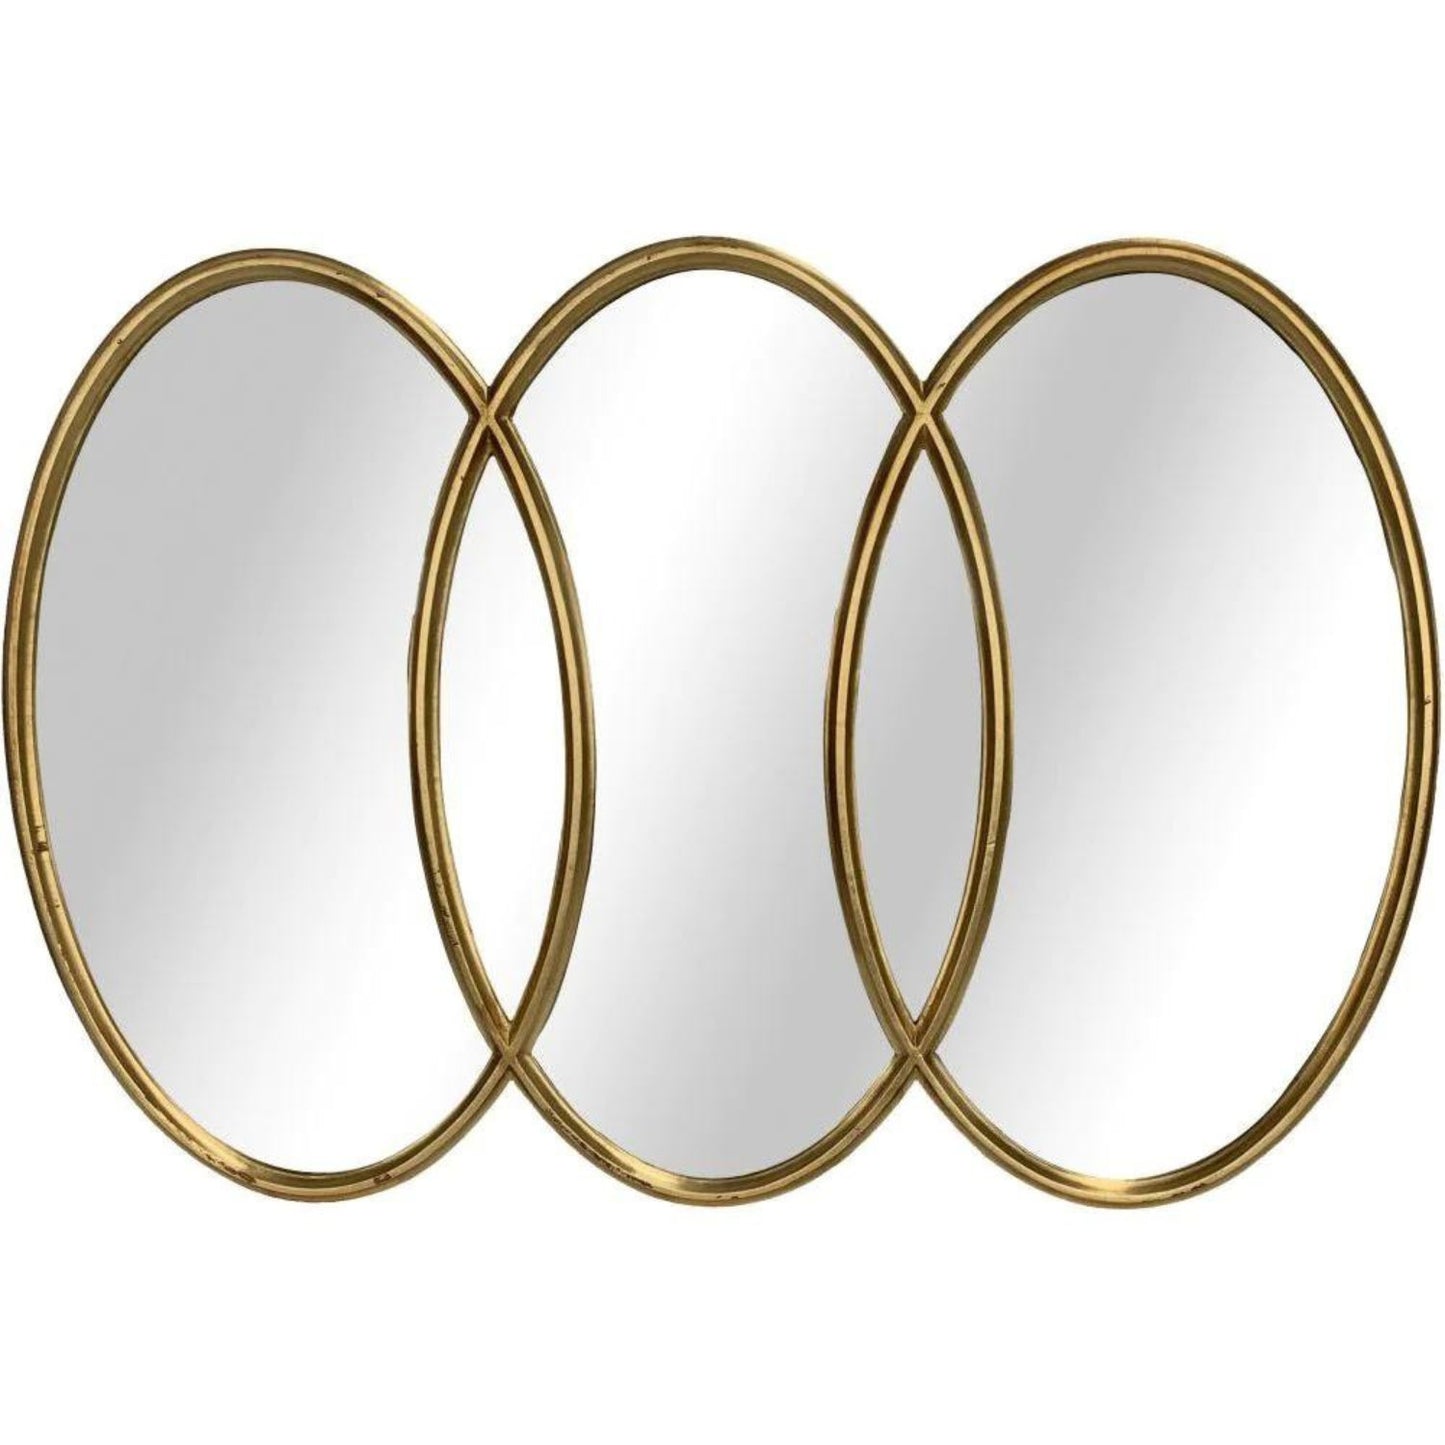 Large Gold Overlapping Triple Oval Wall Mirror 121x81cm